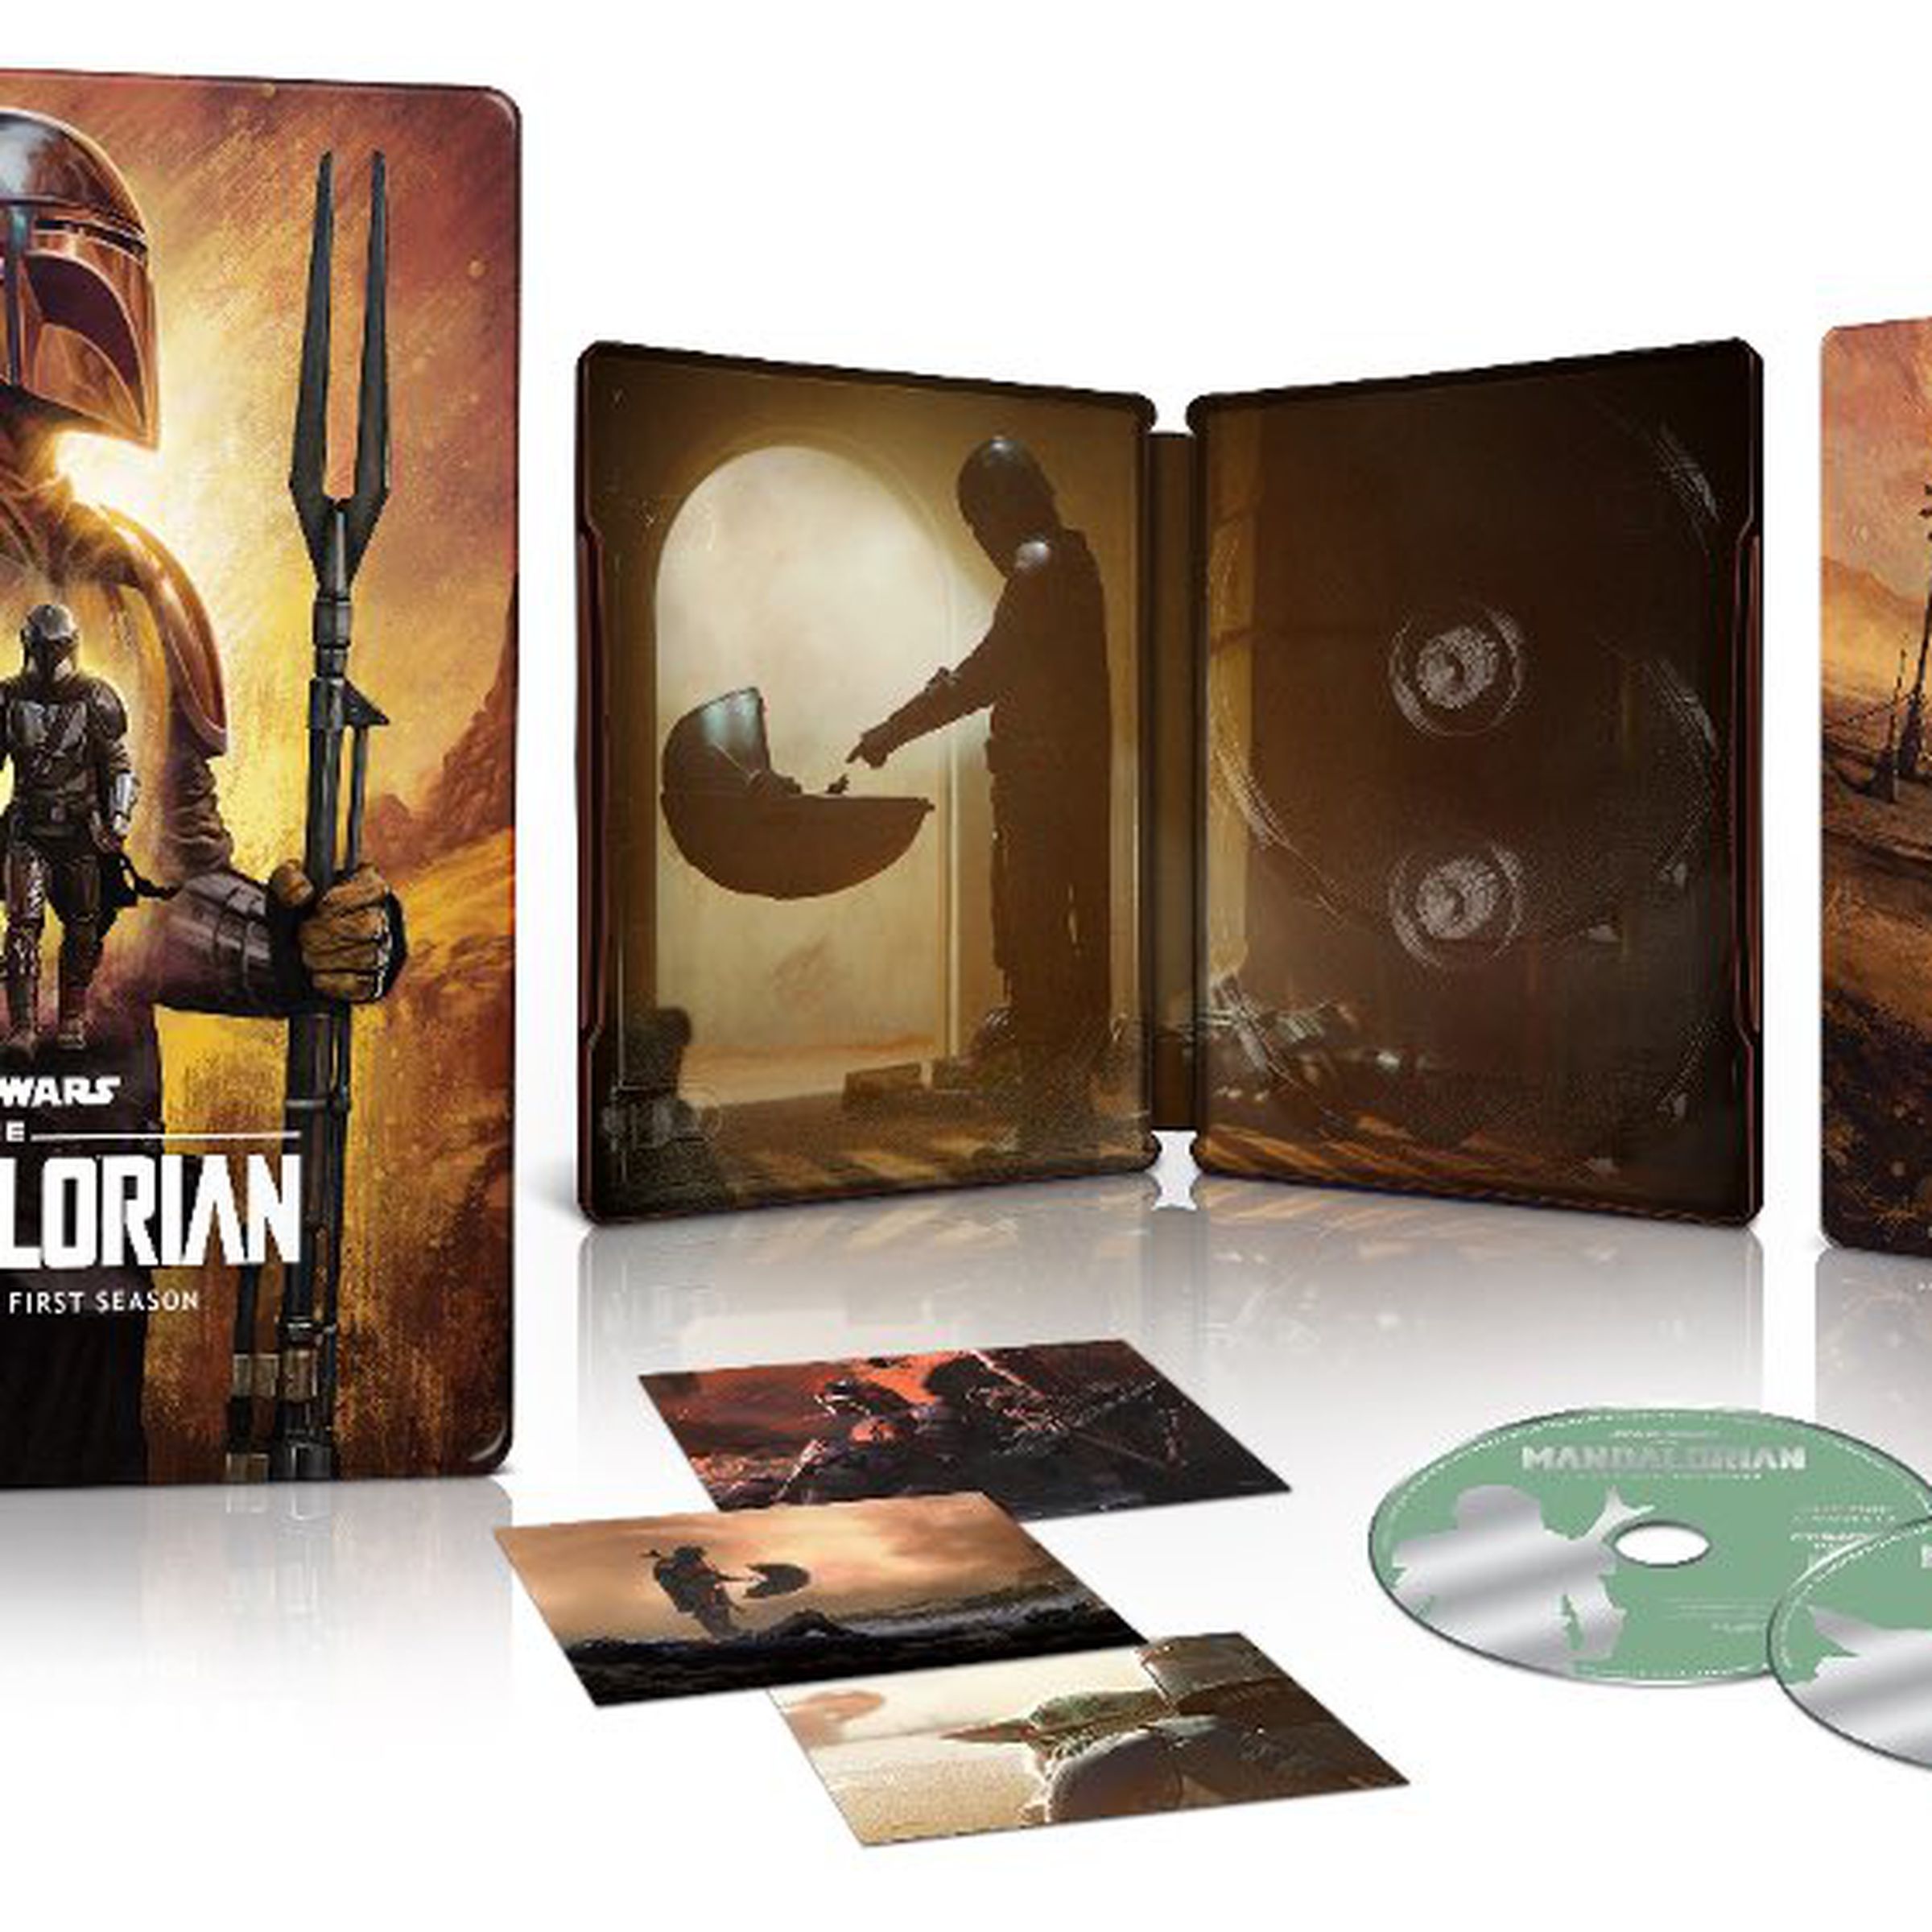 An image showing The Mandalorian on Blu-ray